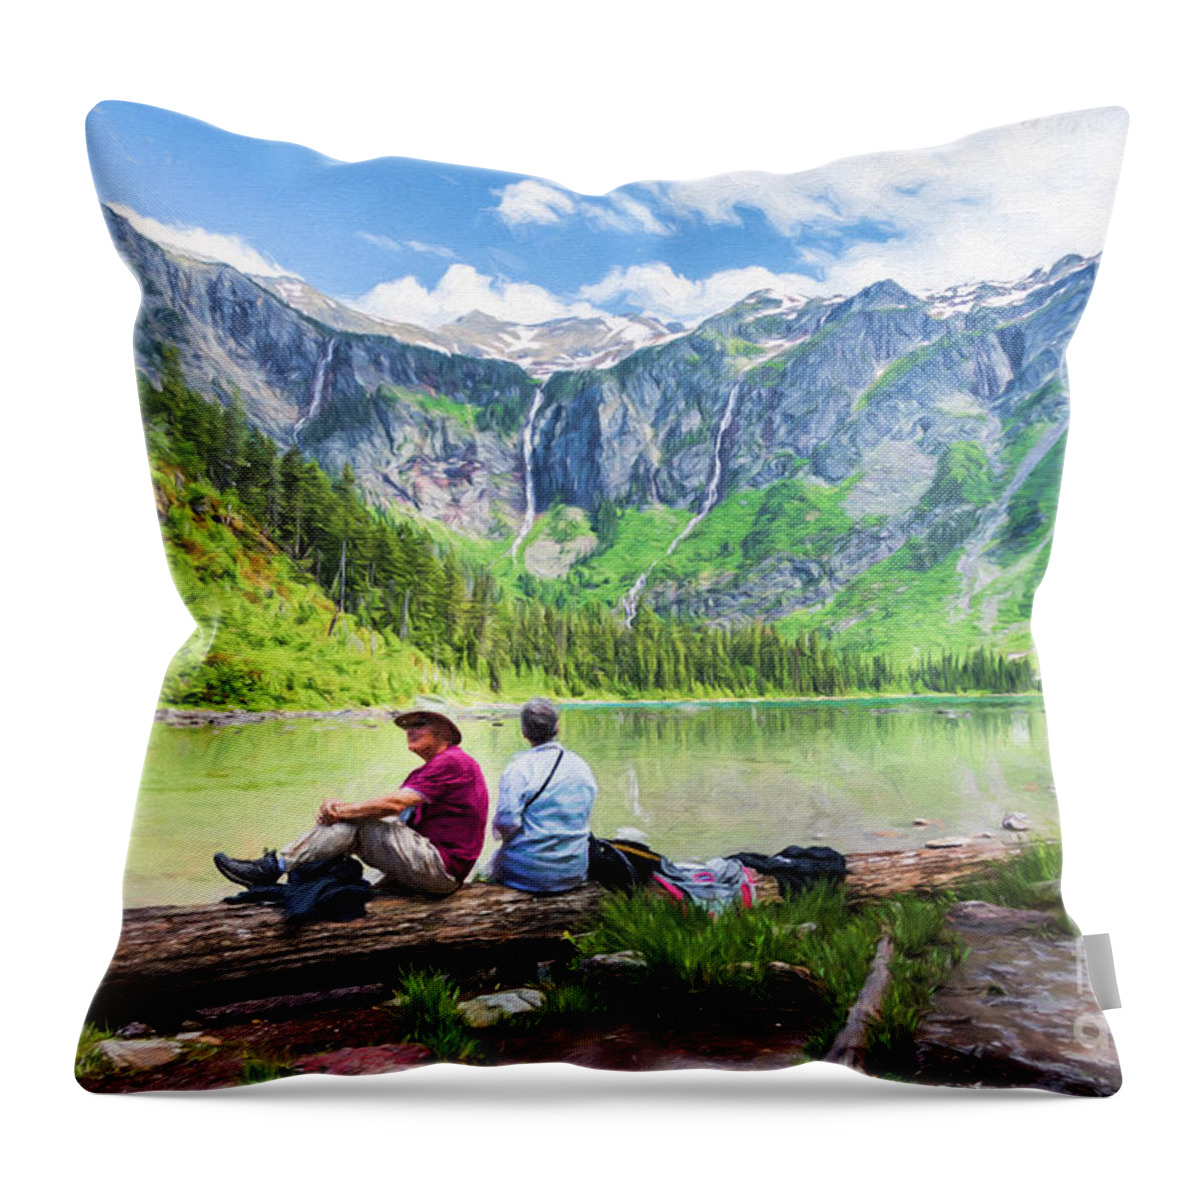 Avalanche Lake Throw Pillow featuring the photograph Afternoon At Avalanche Lake by Lori Dobbs